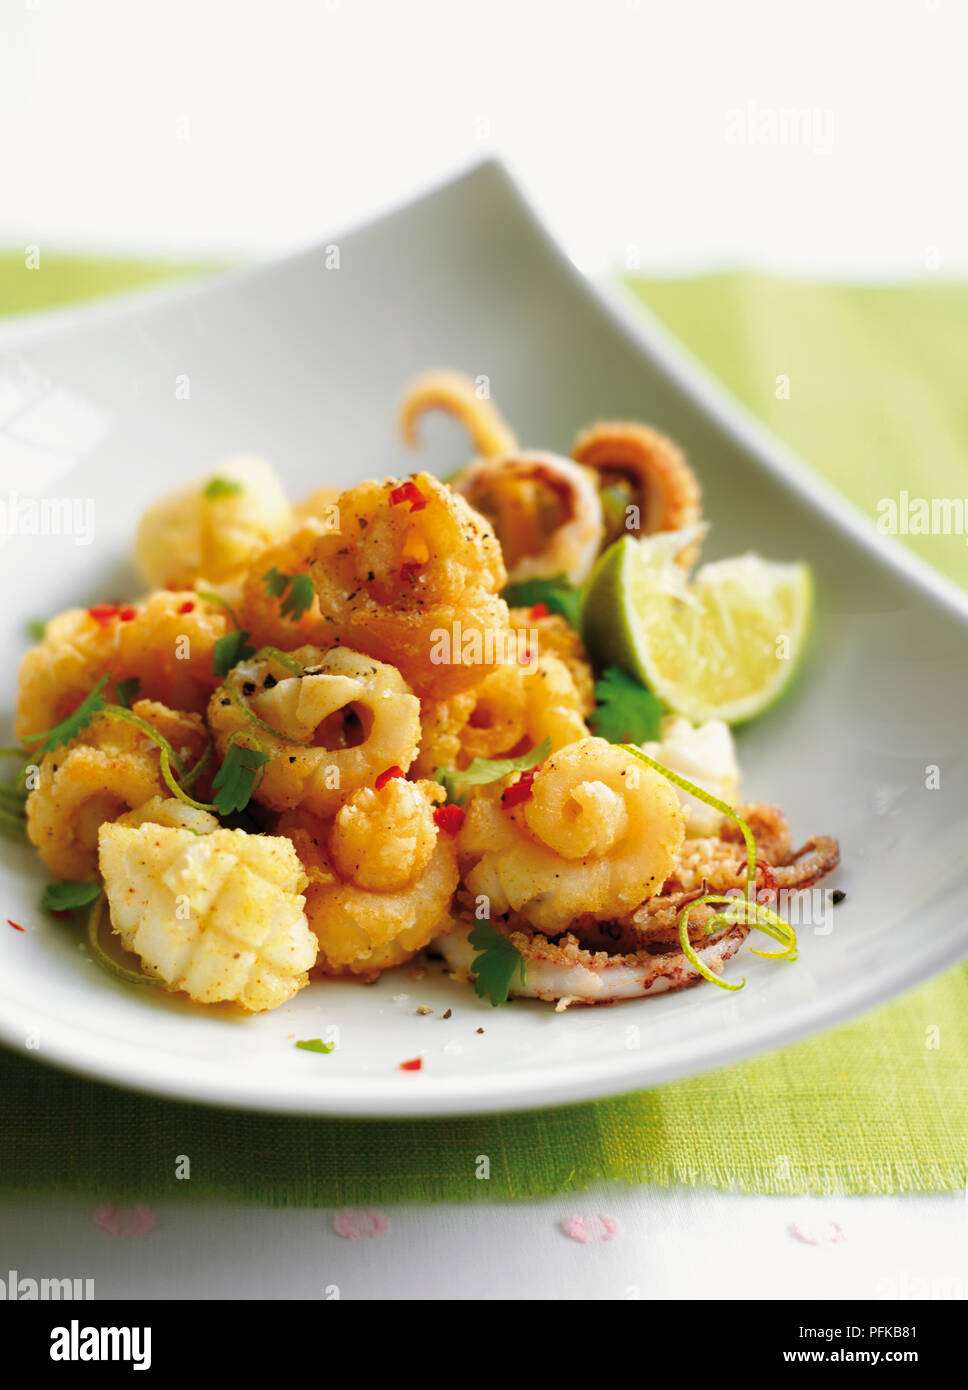 Deep-fried, cornflour coated squid, garnished with chilli, coriander leaves and lime, served on an angular plate Stock Photo